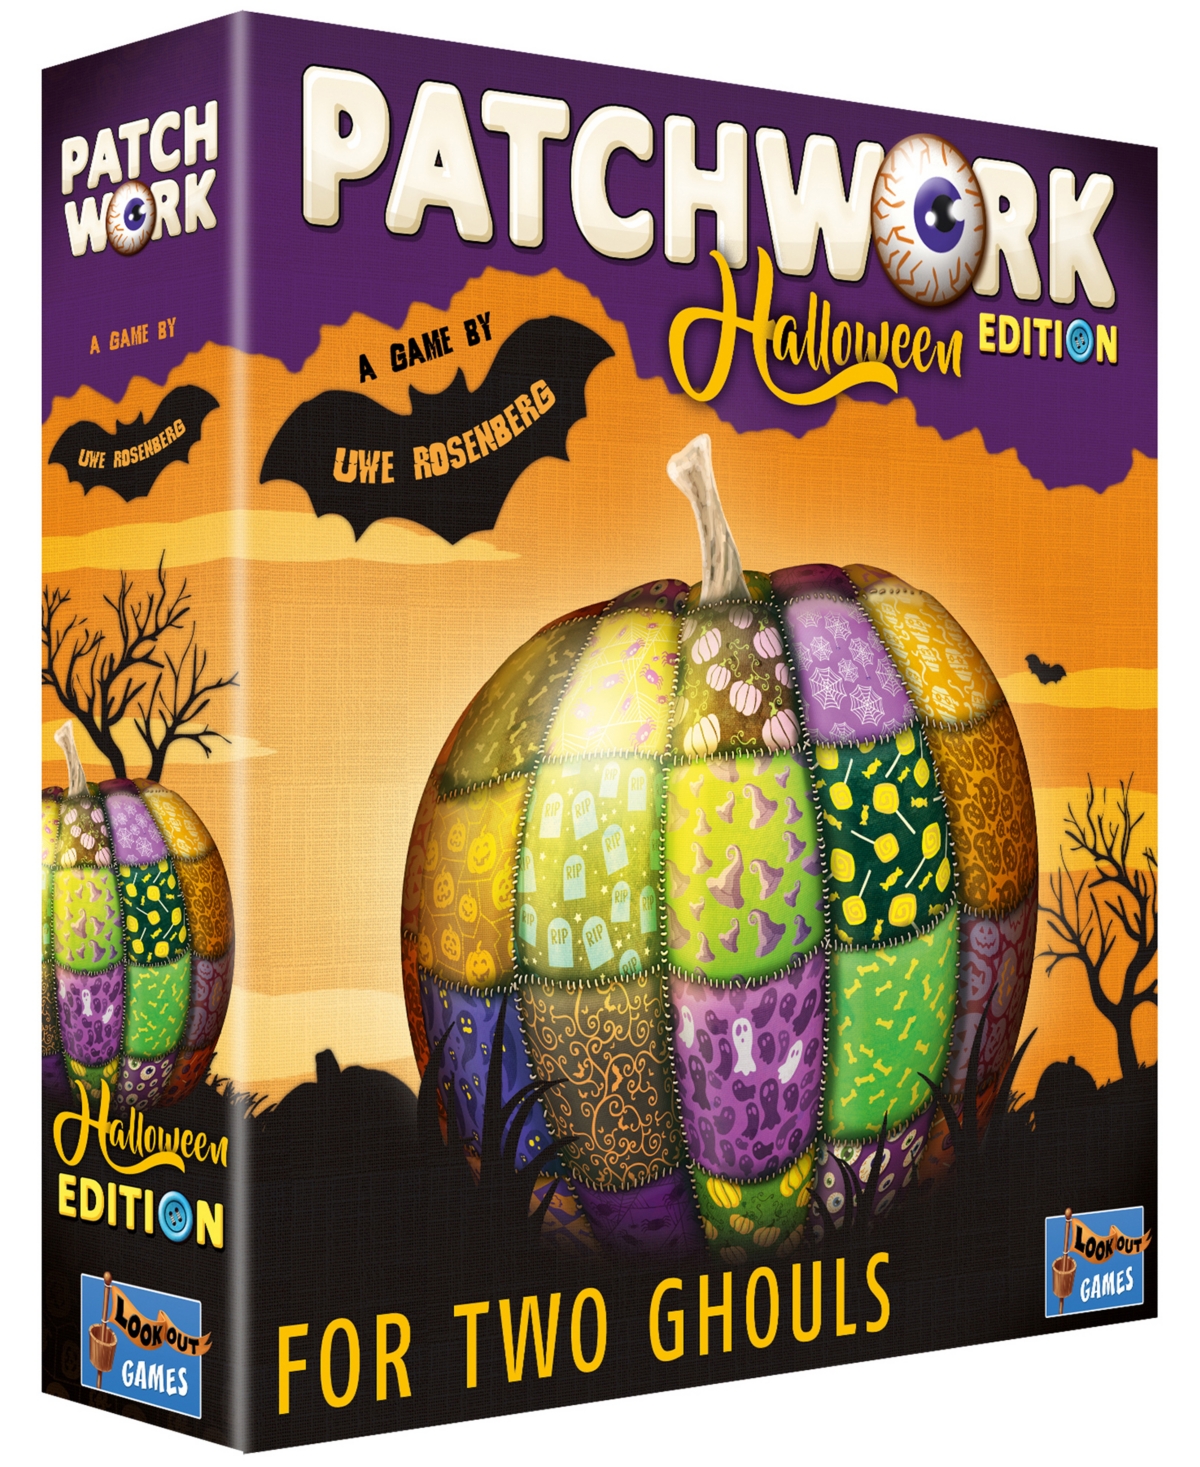 University Games Lookout Games Patchwork Game Halloween Edition In No Color